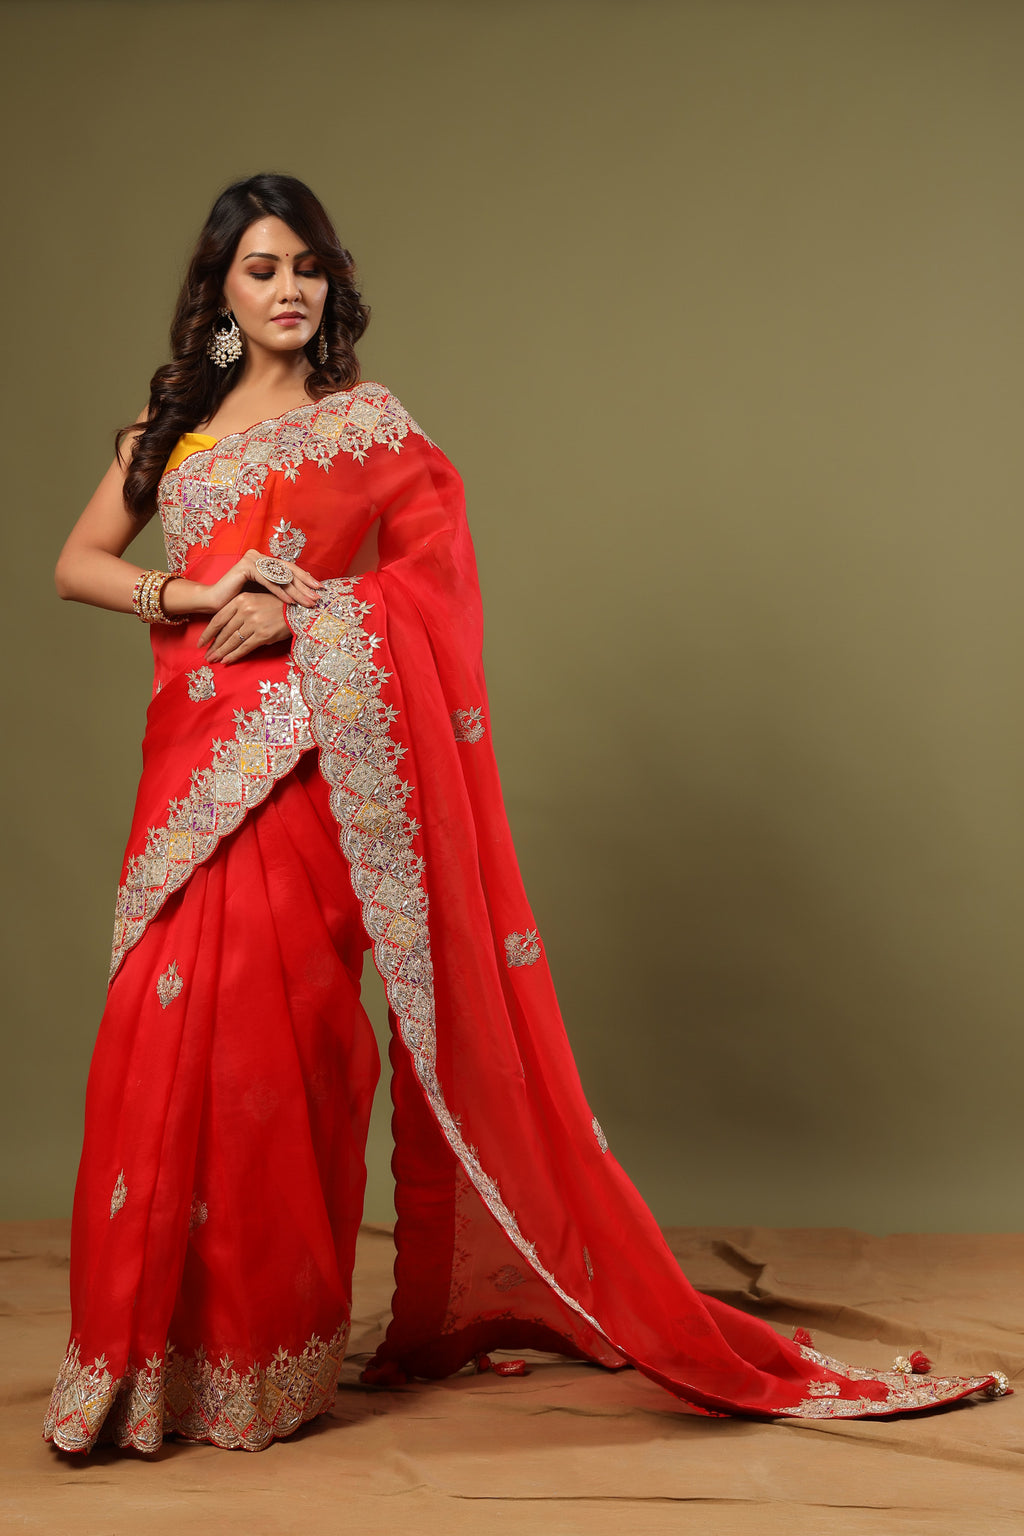 Buy stunning red hand embroidered organza sari online in USA. Make a fashion statement at weddings with stunning designer sarees, embroidered sarees with blouse, wedding sarees, handloom sarees from Pure Elegance Indian fashion store in USA.-full view